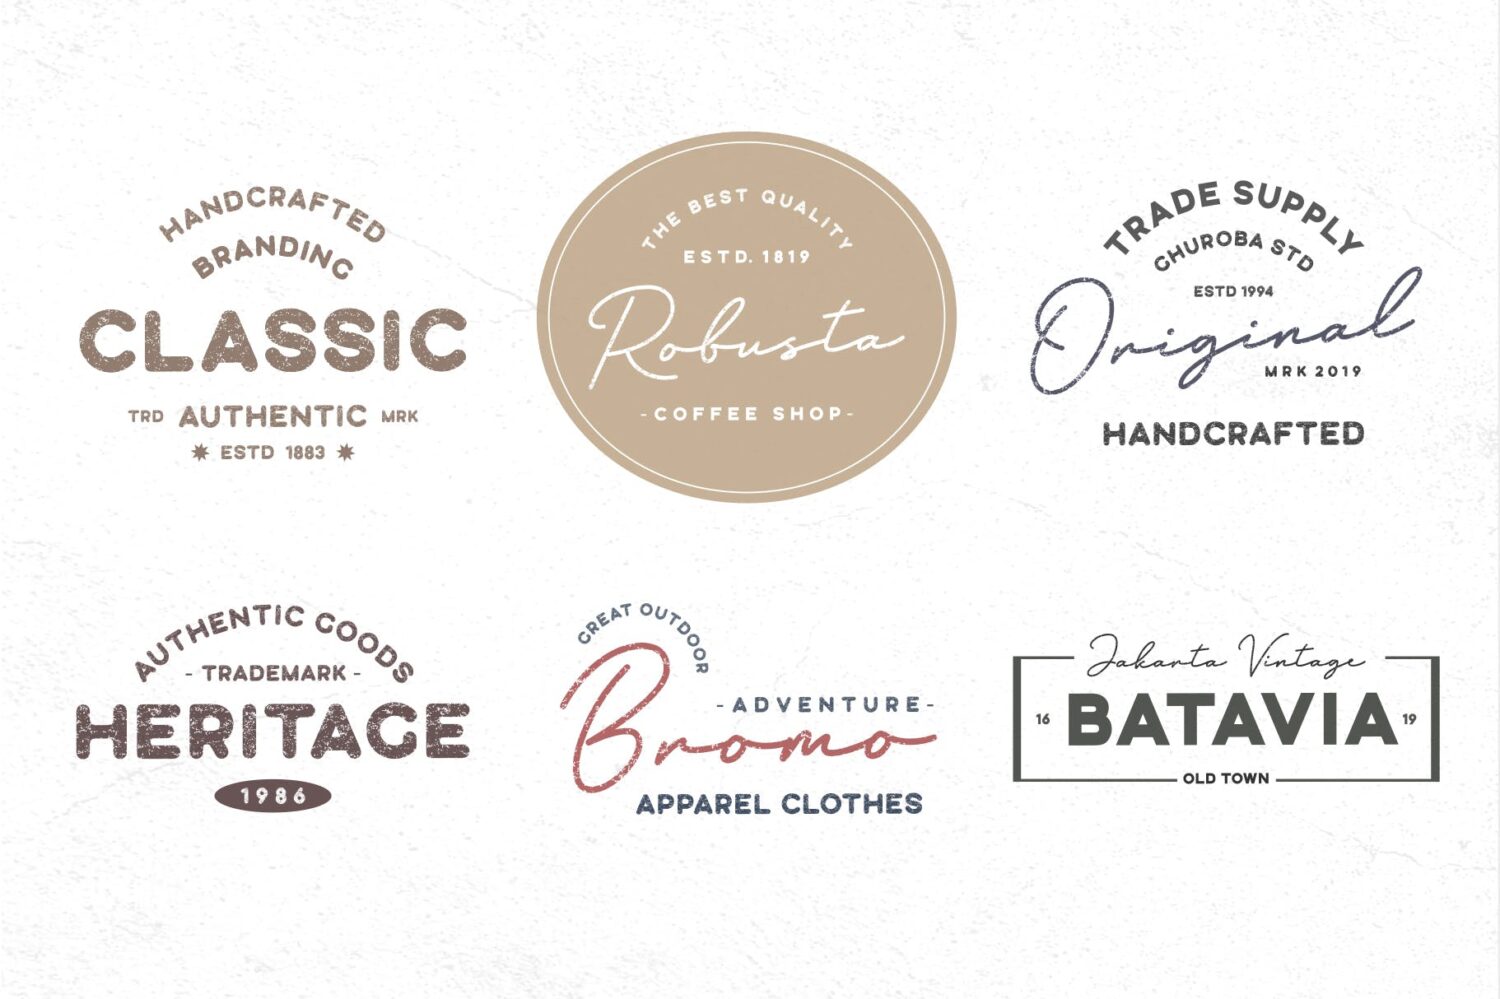 Free The Silverstone Collection Font